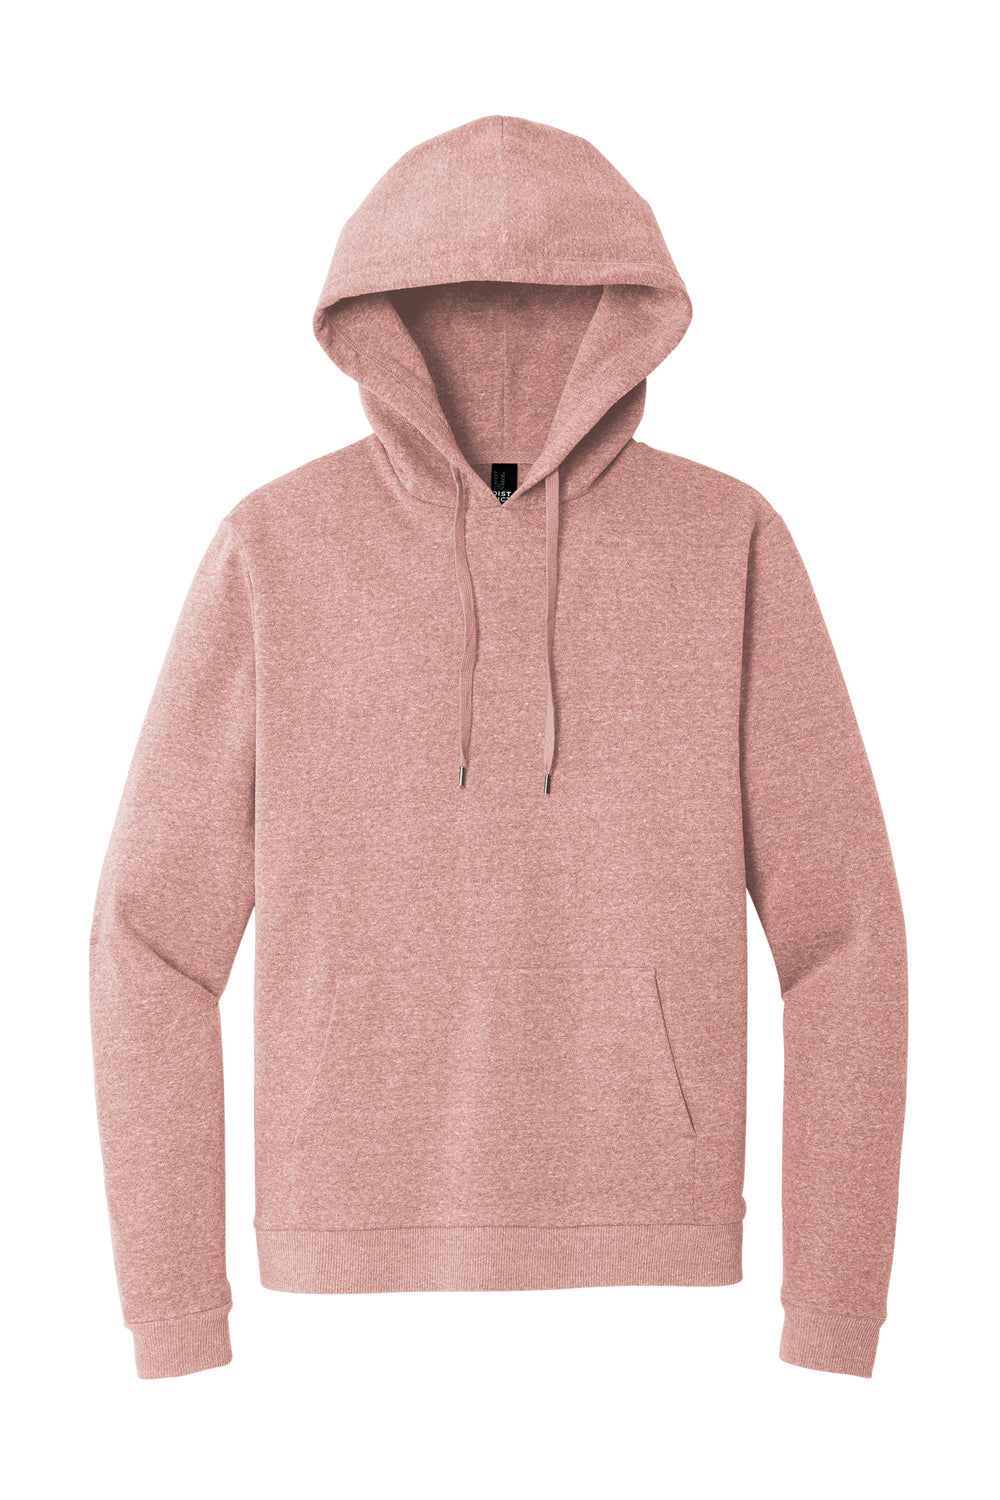 District DT1300 Mens Perfect Tri Fleece Hooded Sweatshirt Hoodie Blush Frost Flat Front